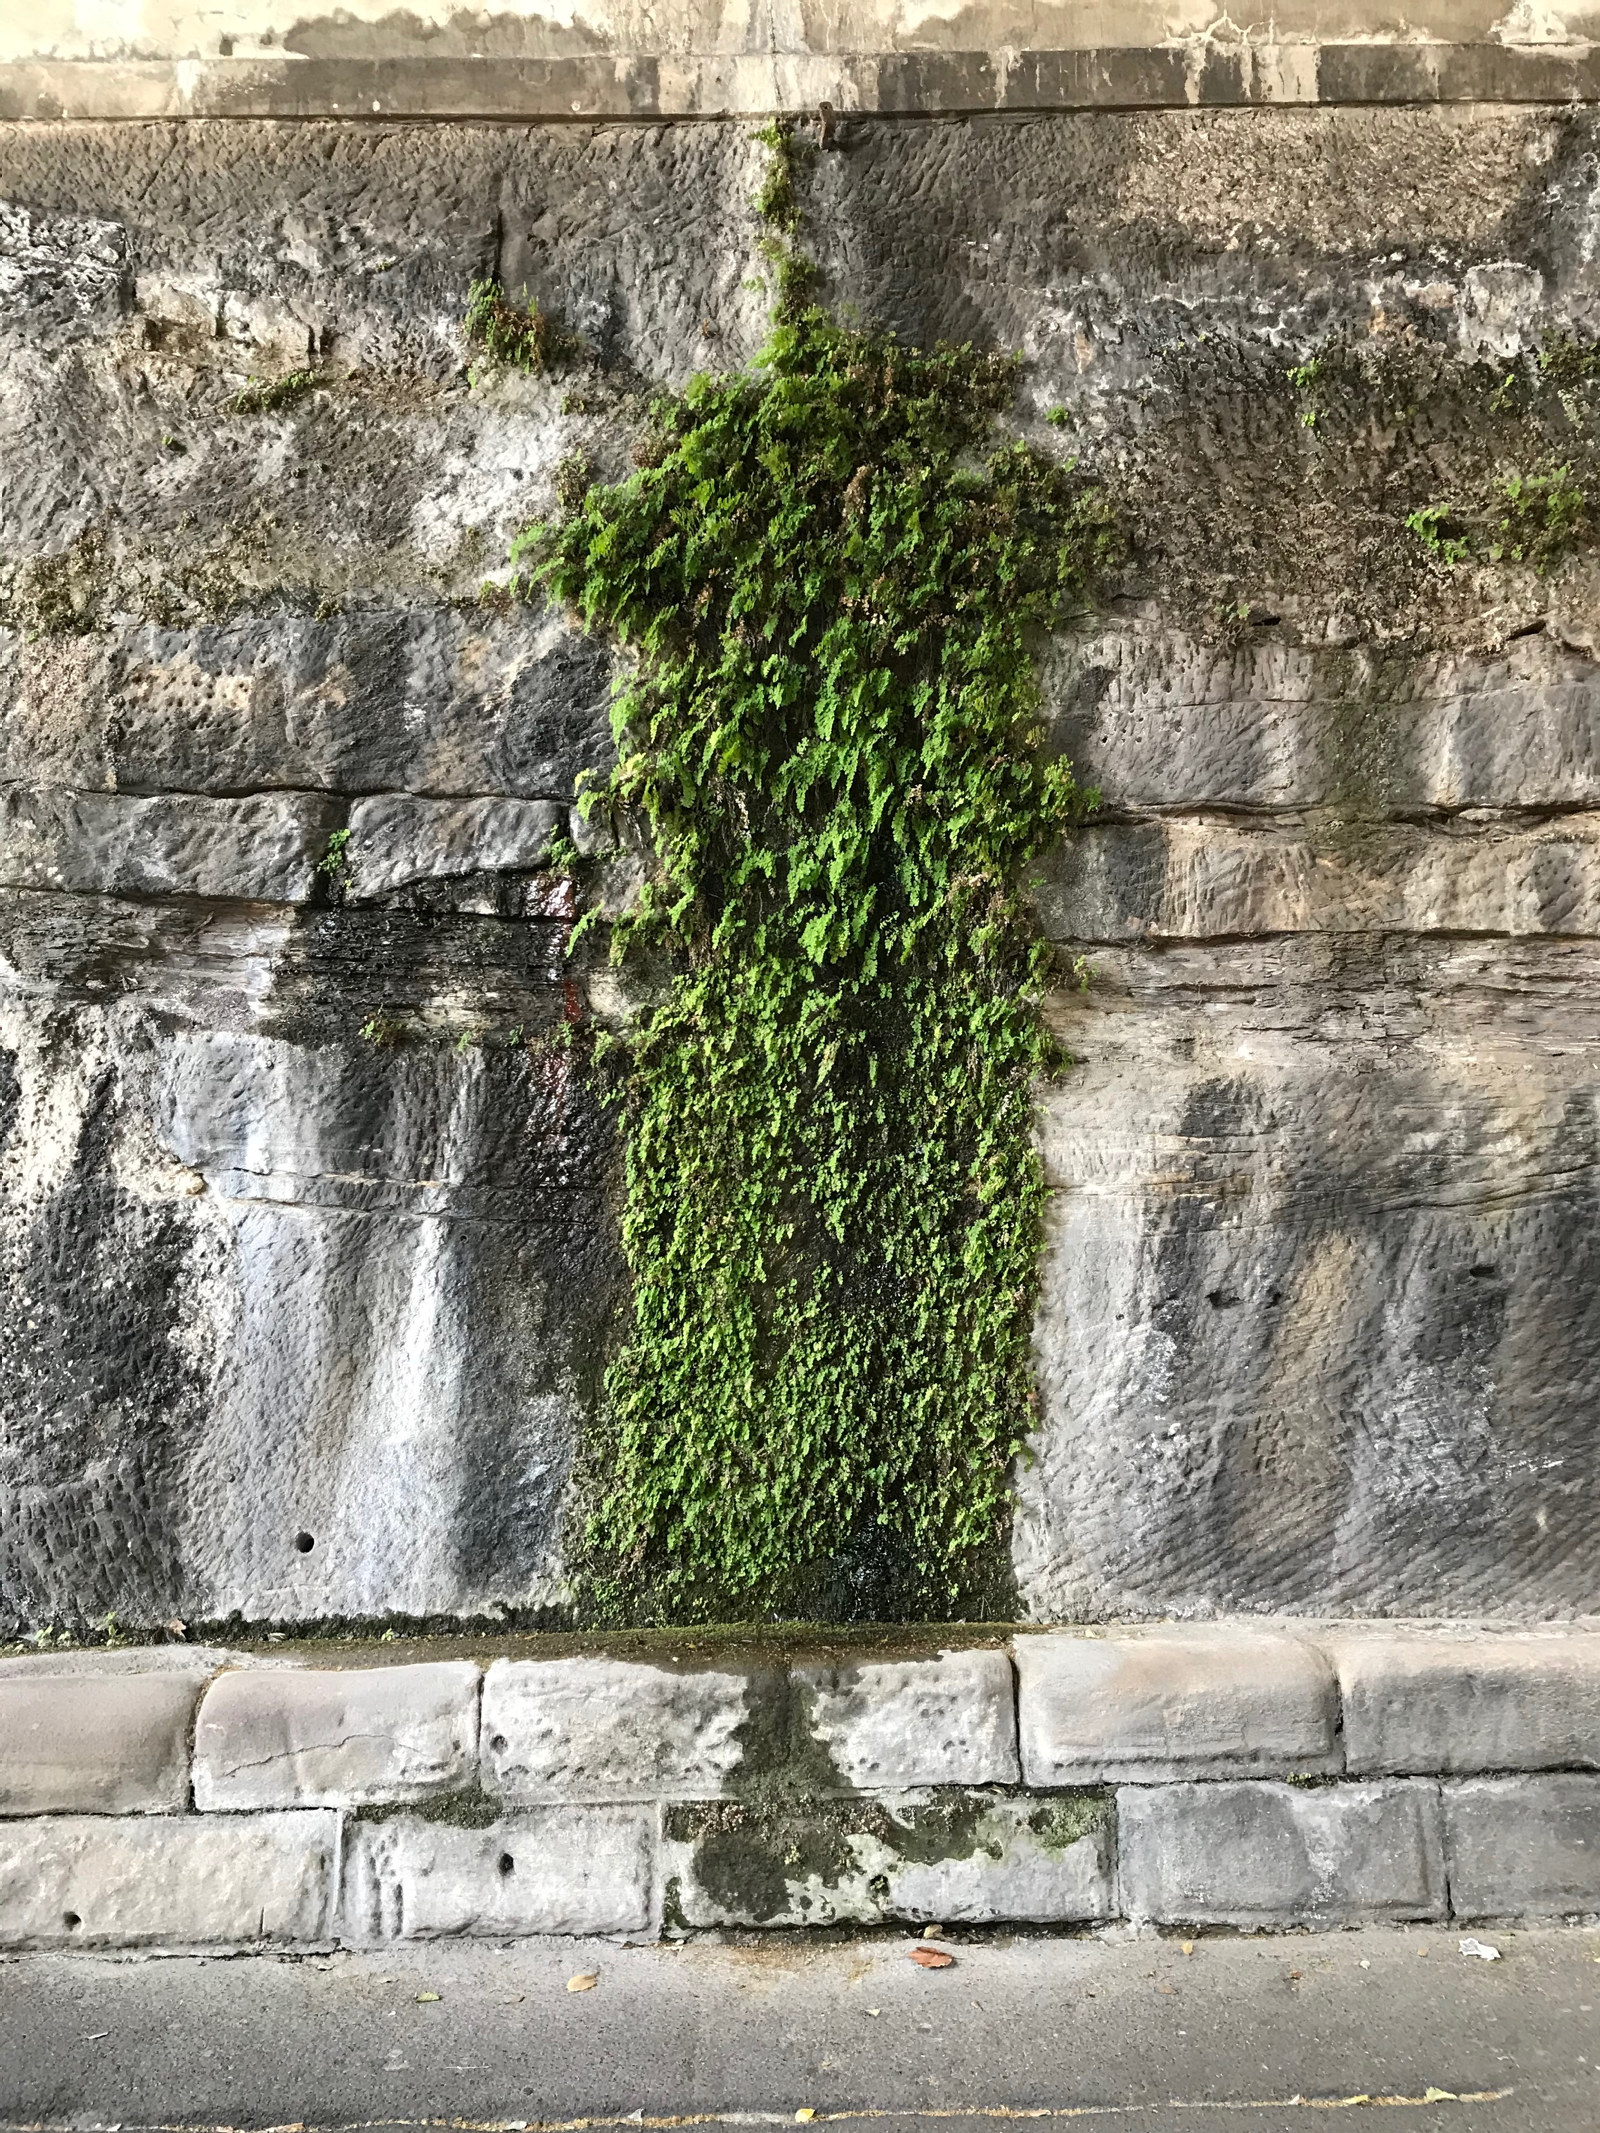 A lush green fern grows on the damp sandstone